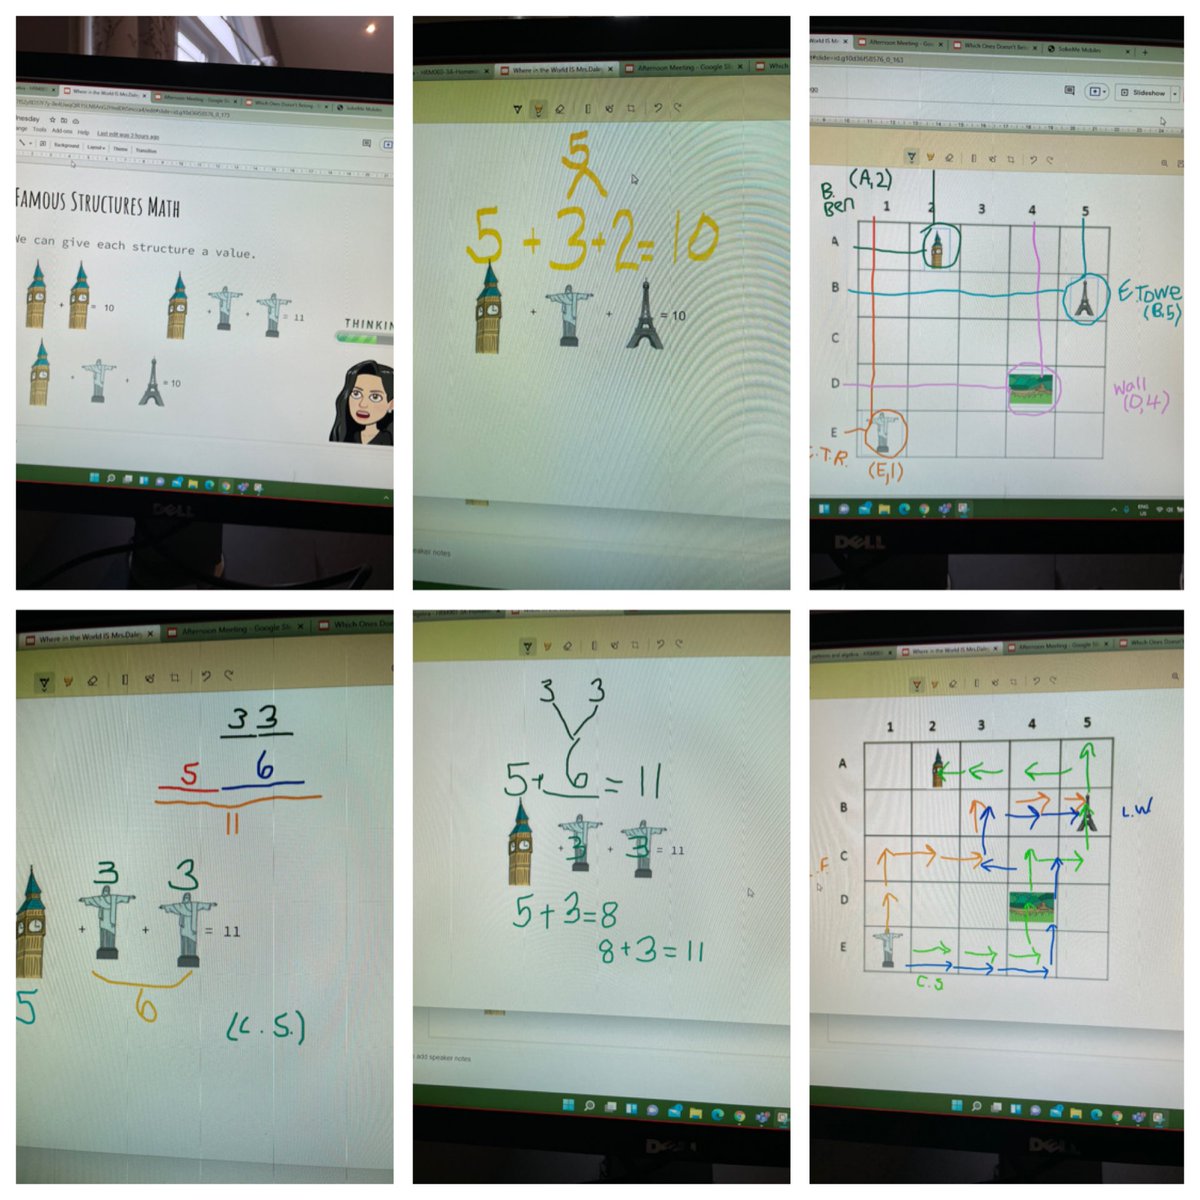 Mrs Daley Twitter Tweet: Today’s edition of WhereintheWorld is Mrs.Daley Weds had us examining location on a grid, describing movement on a grid, planning coding models + thinking algebraically. We visualized the math + explained a partner’s thinking! ⁦@GEDSB⁩ ⁦@ted_smth⁩ ⁦@JarvisJets⁩ https://t.co/j5Xp9UPkec